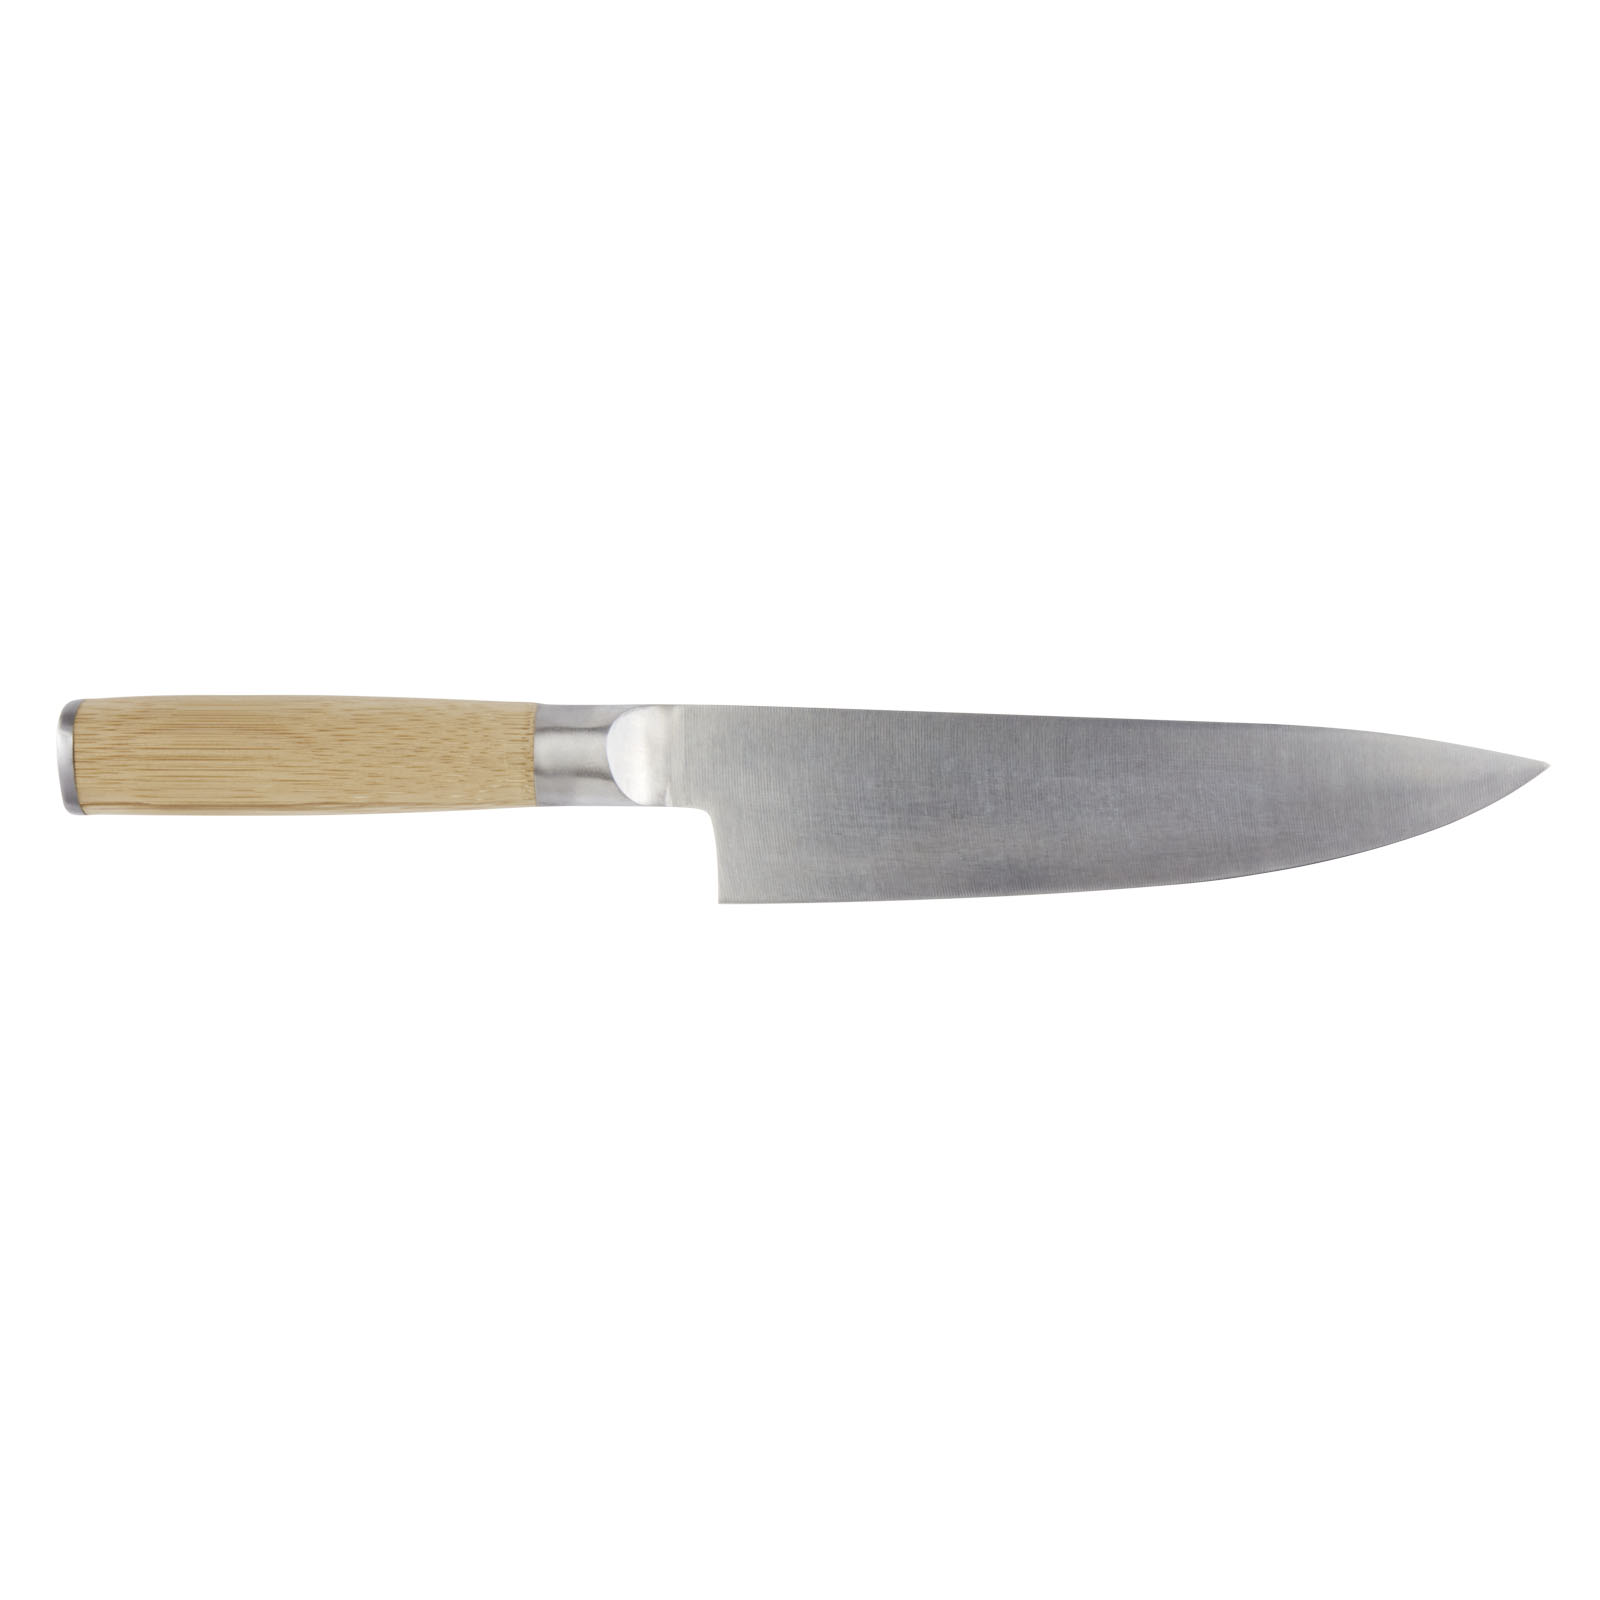 Advertising Chef's Knives - Cocin chef's knife - 2